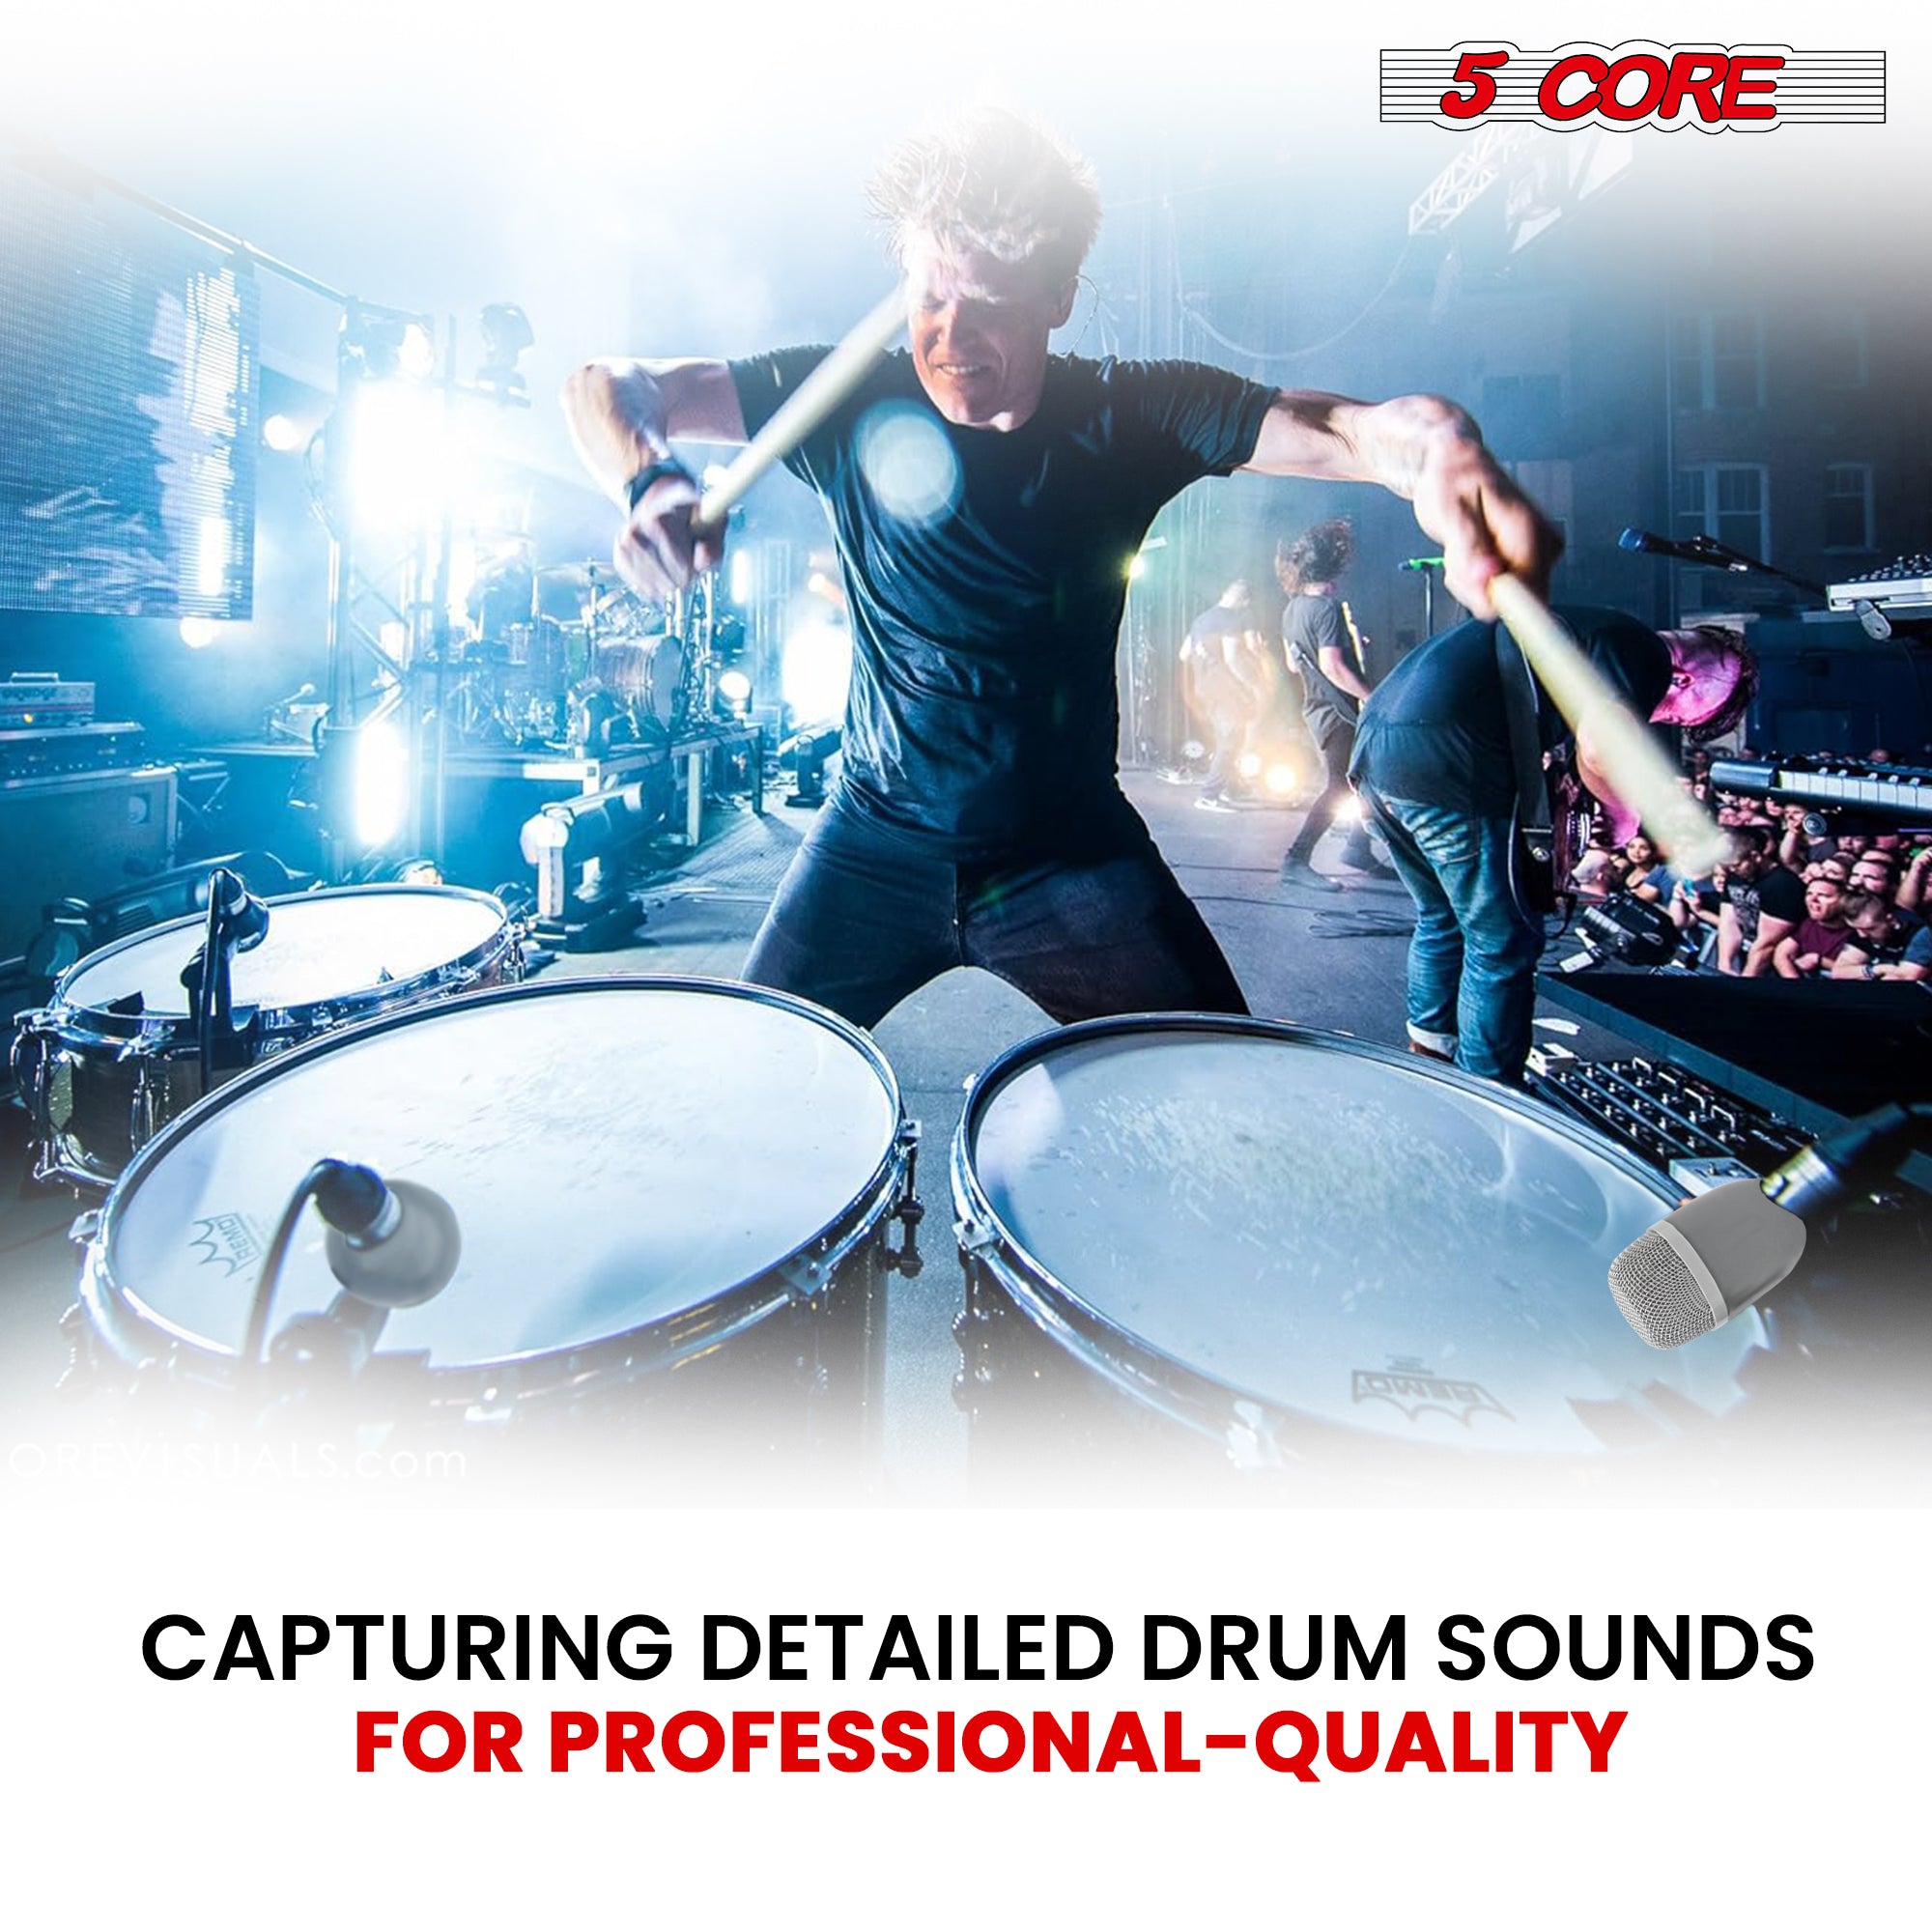 5 Core Tom Snare Mic • Cardioid Dynamic Microphone for Drum Kit • Precision Instrument Sound Pickup